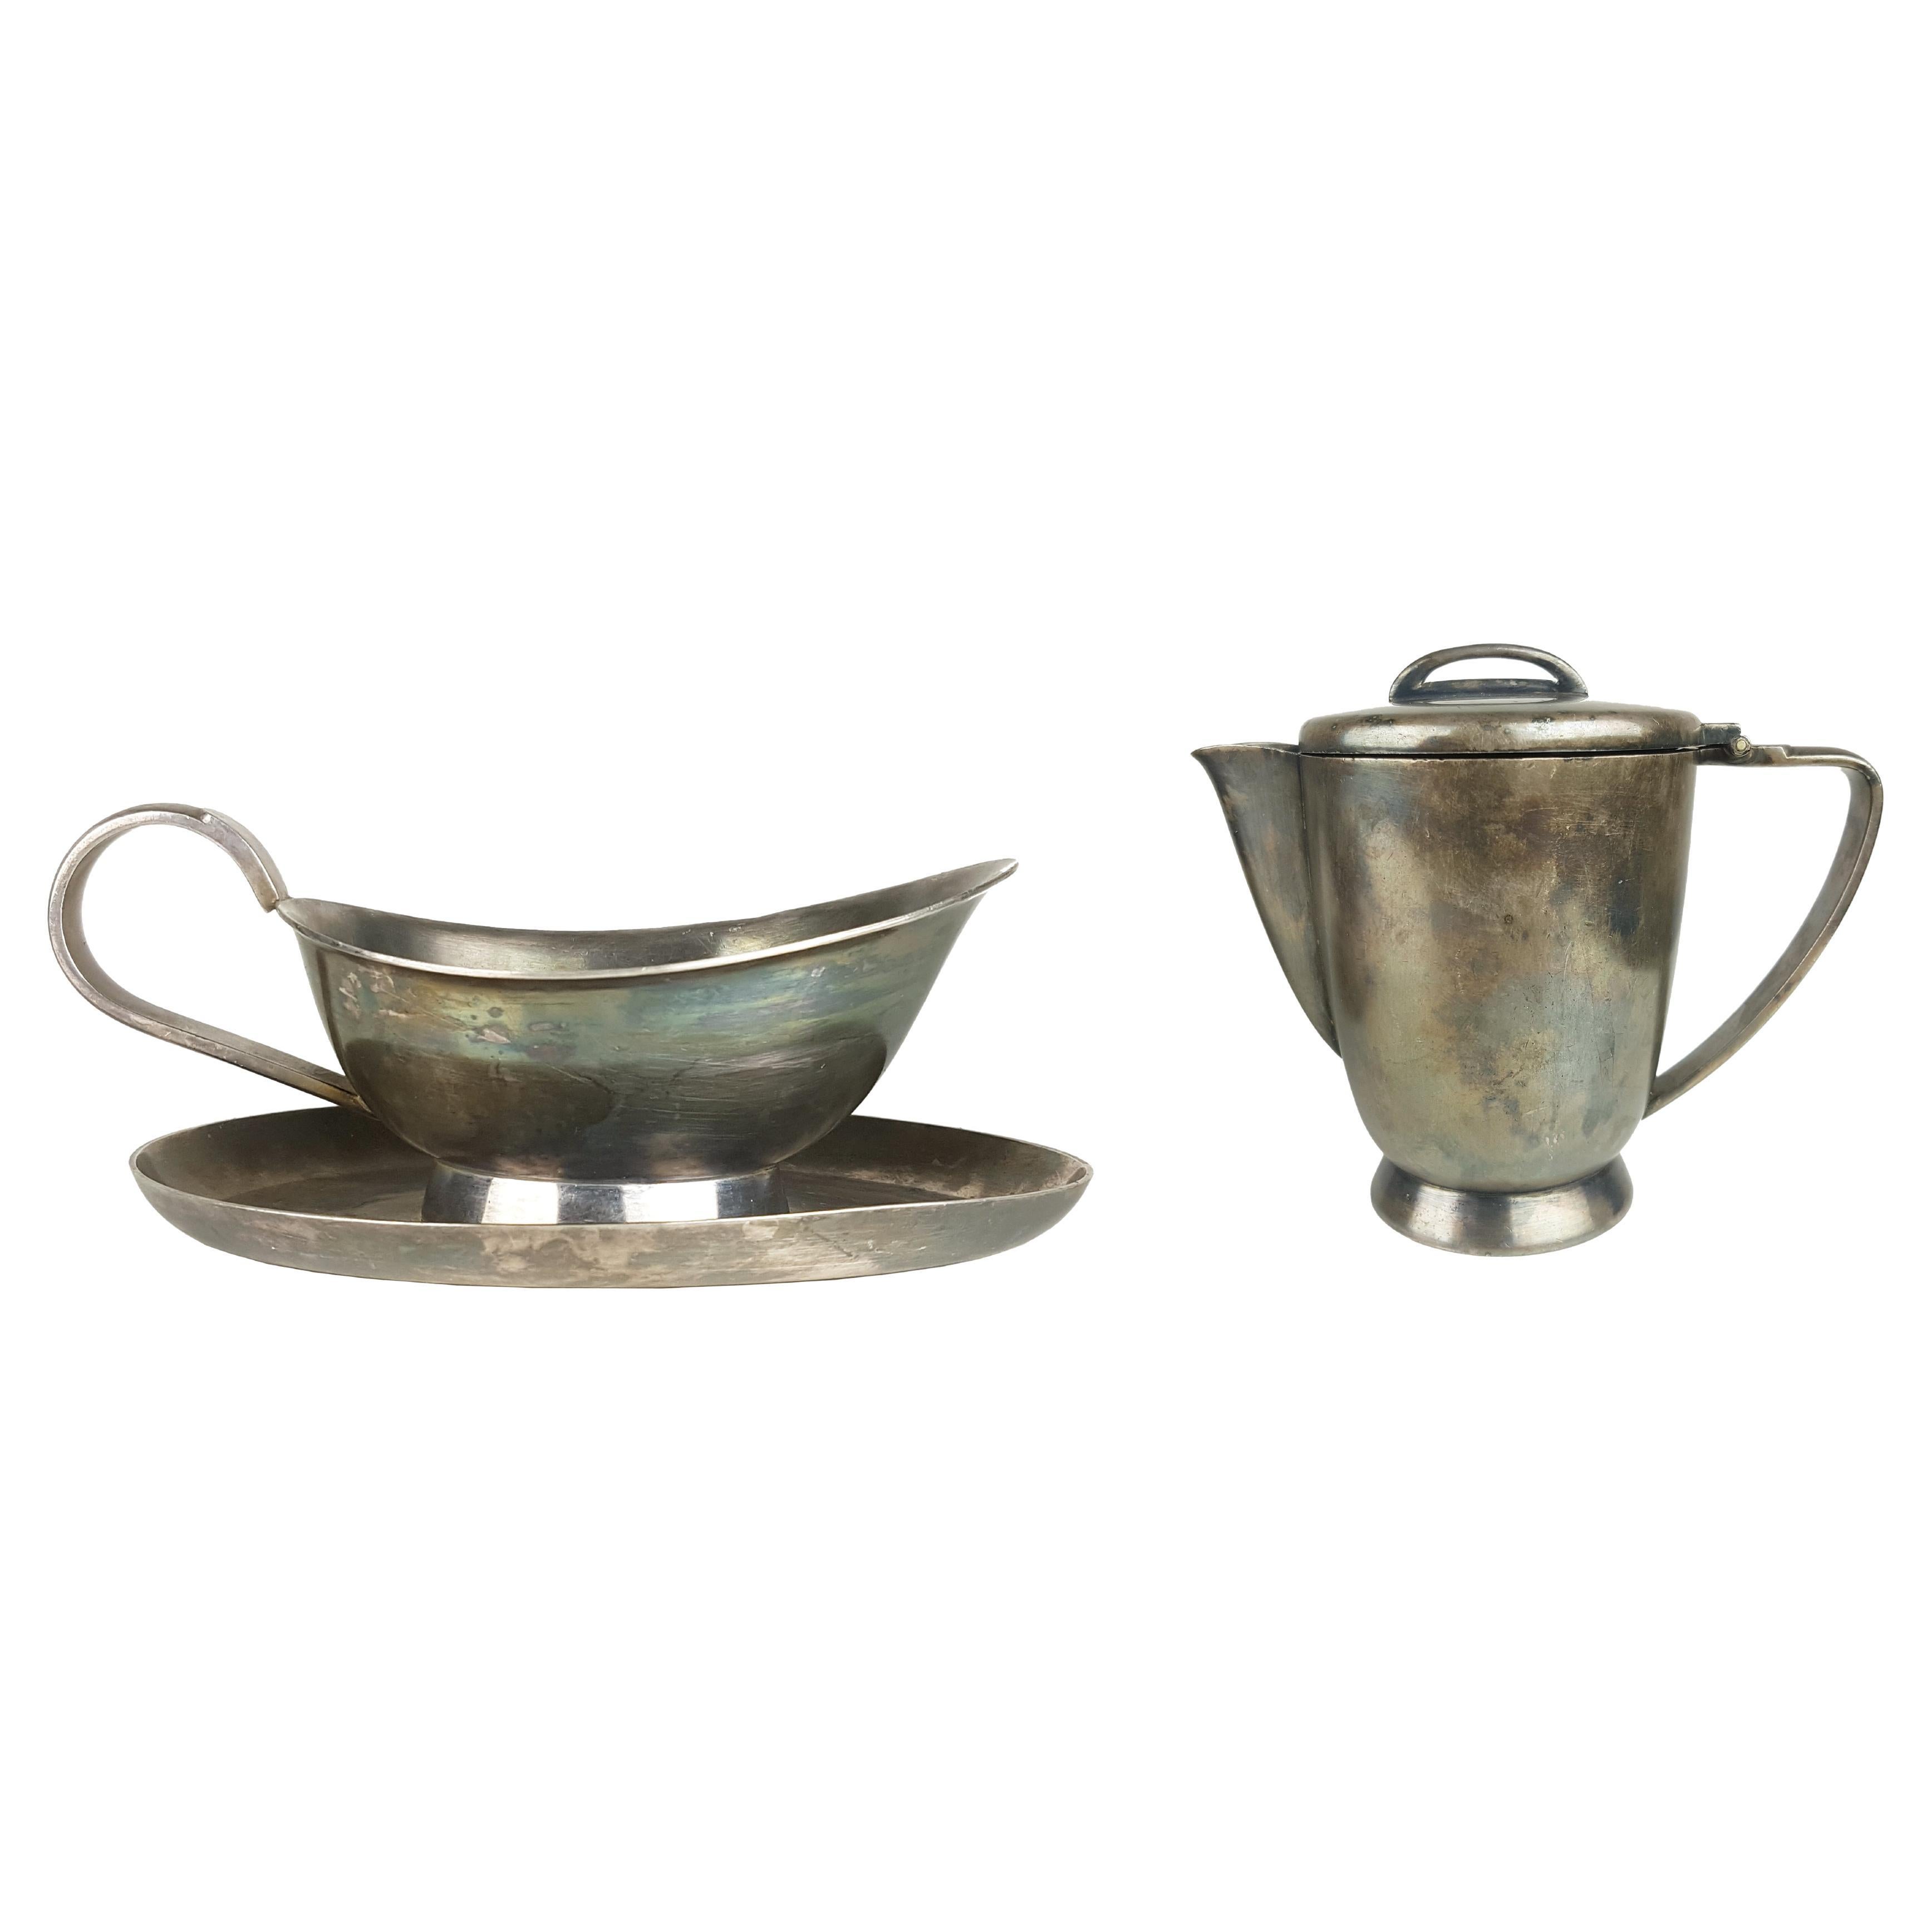 Silver-Plated milk jug and gravy boat by Gio Ponti for Calderoni, 1930s For Sale